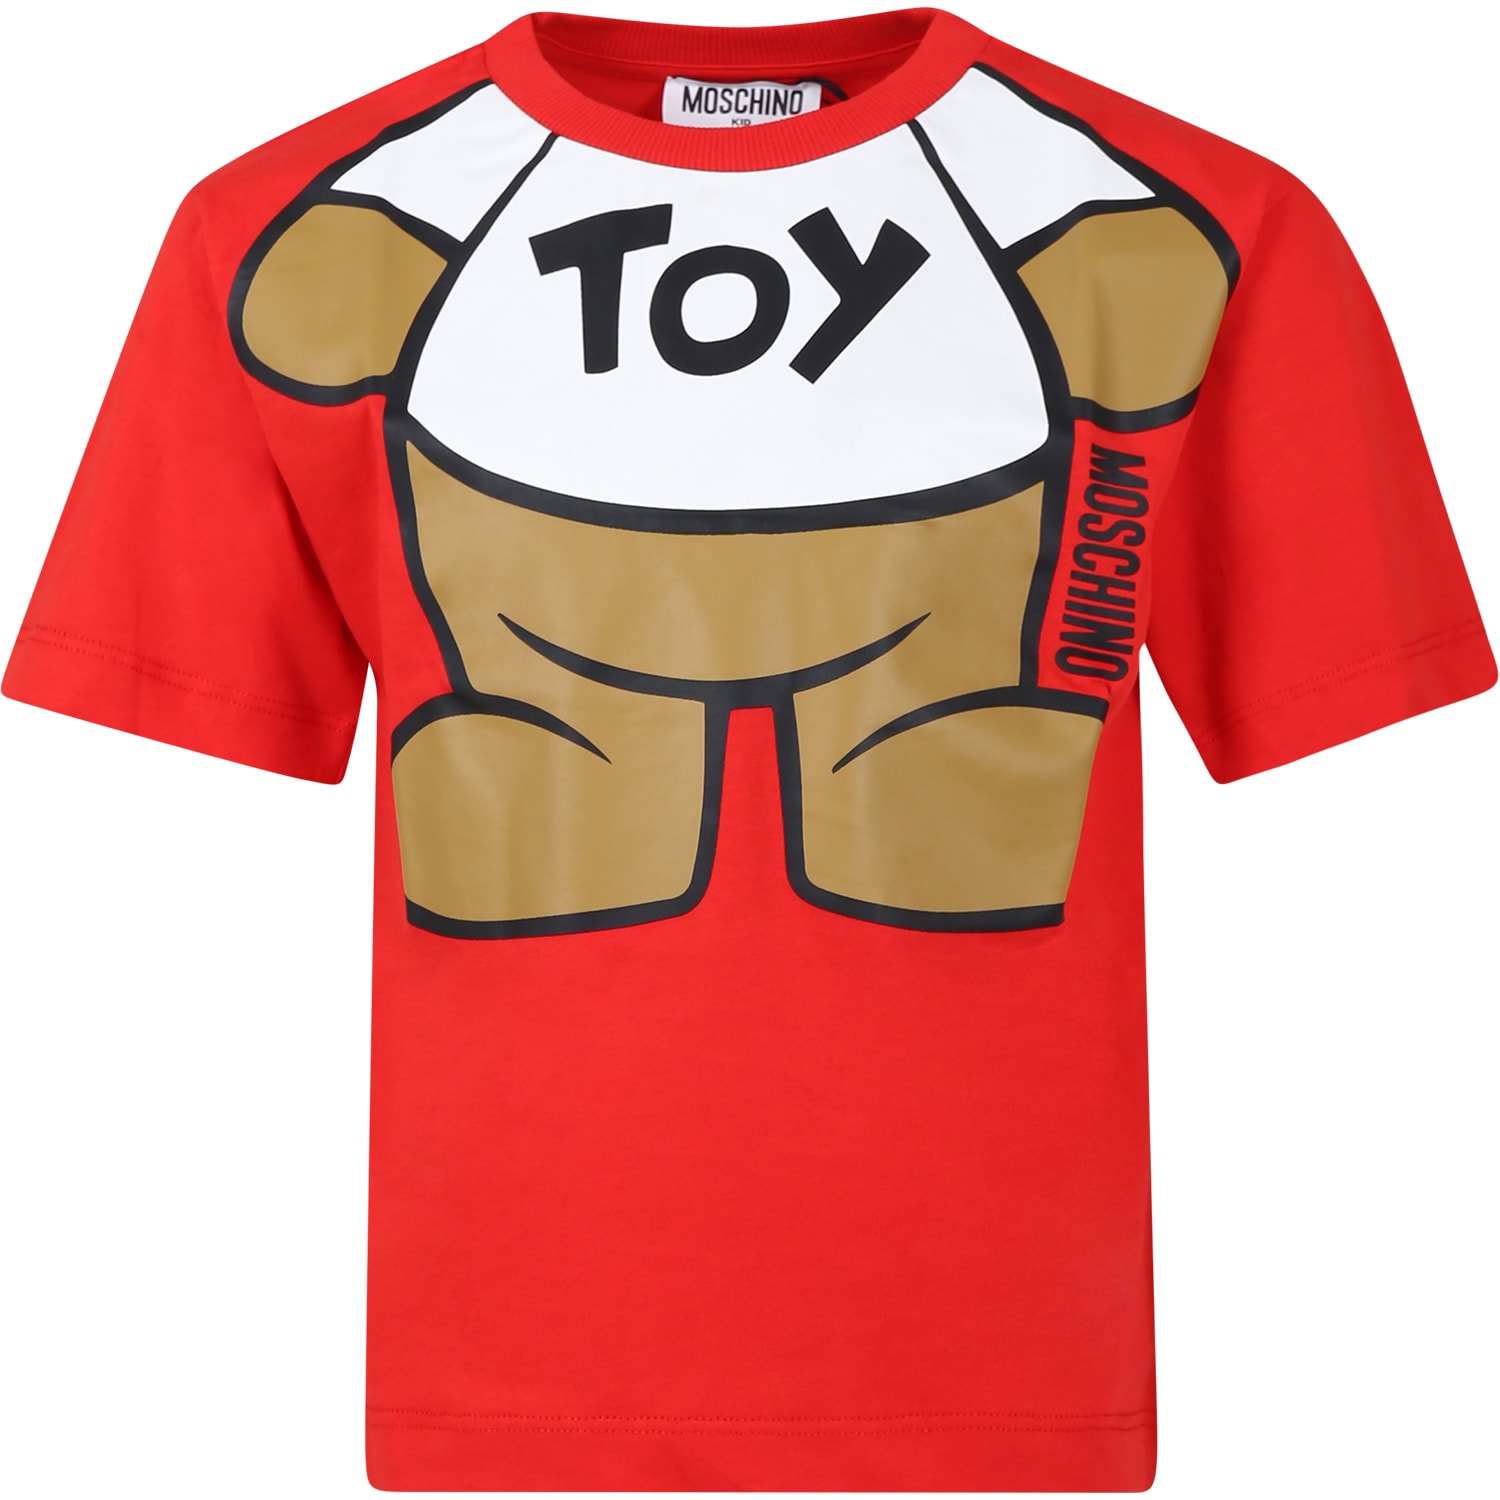 Moschino Kids' Red T-shirt For Boy With Teddy Bear